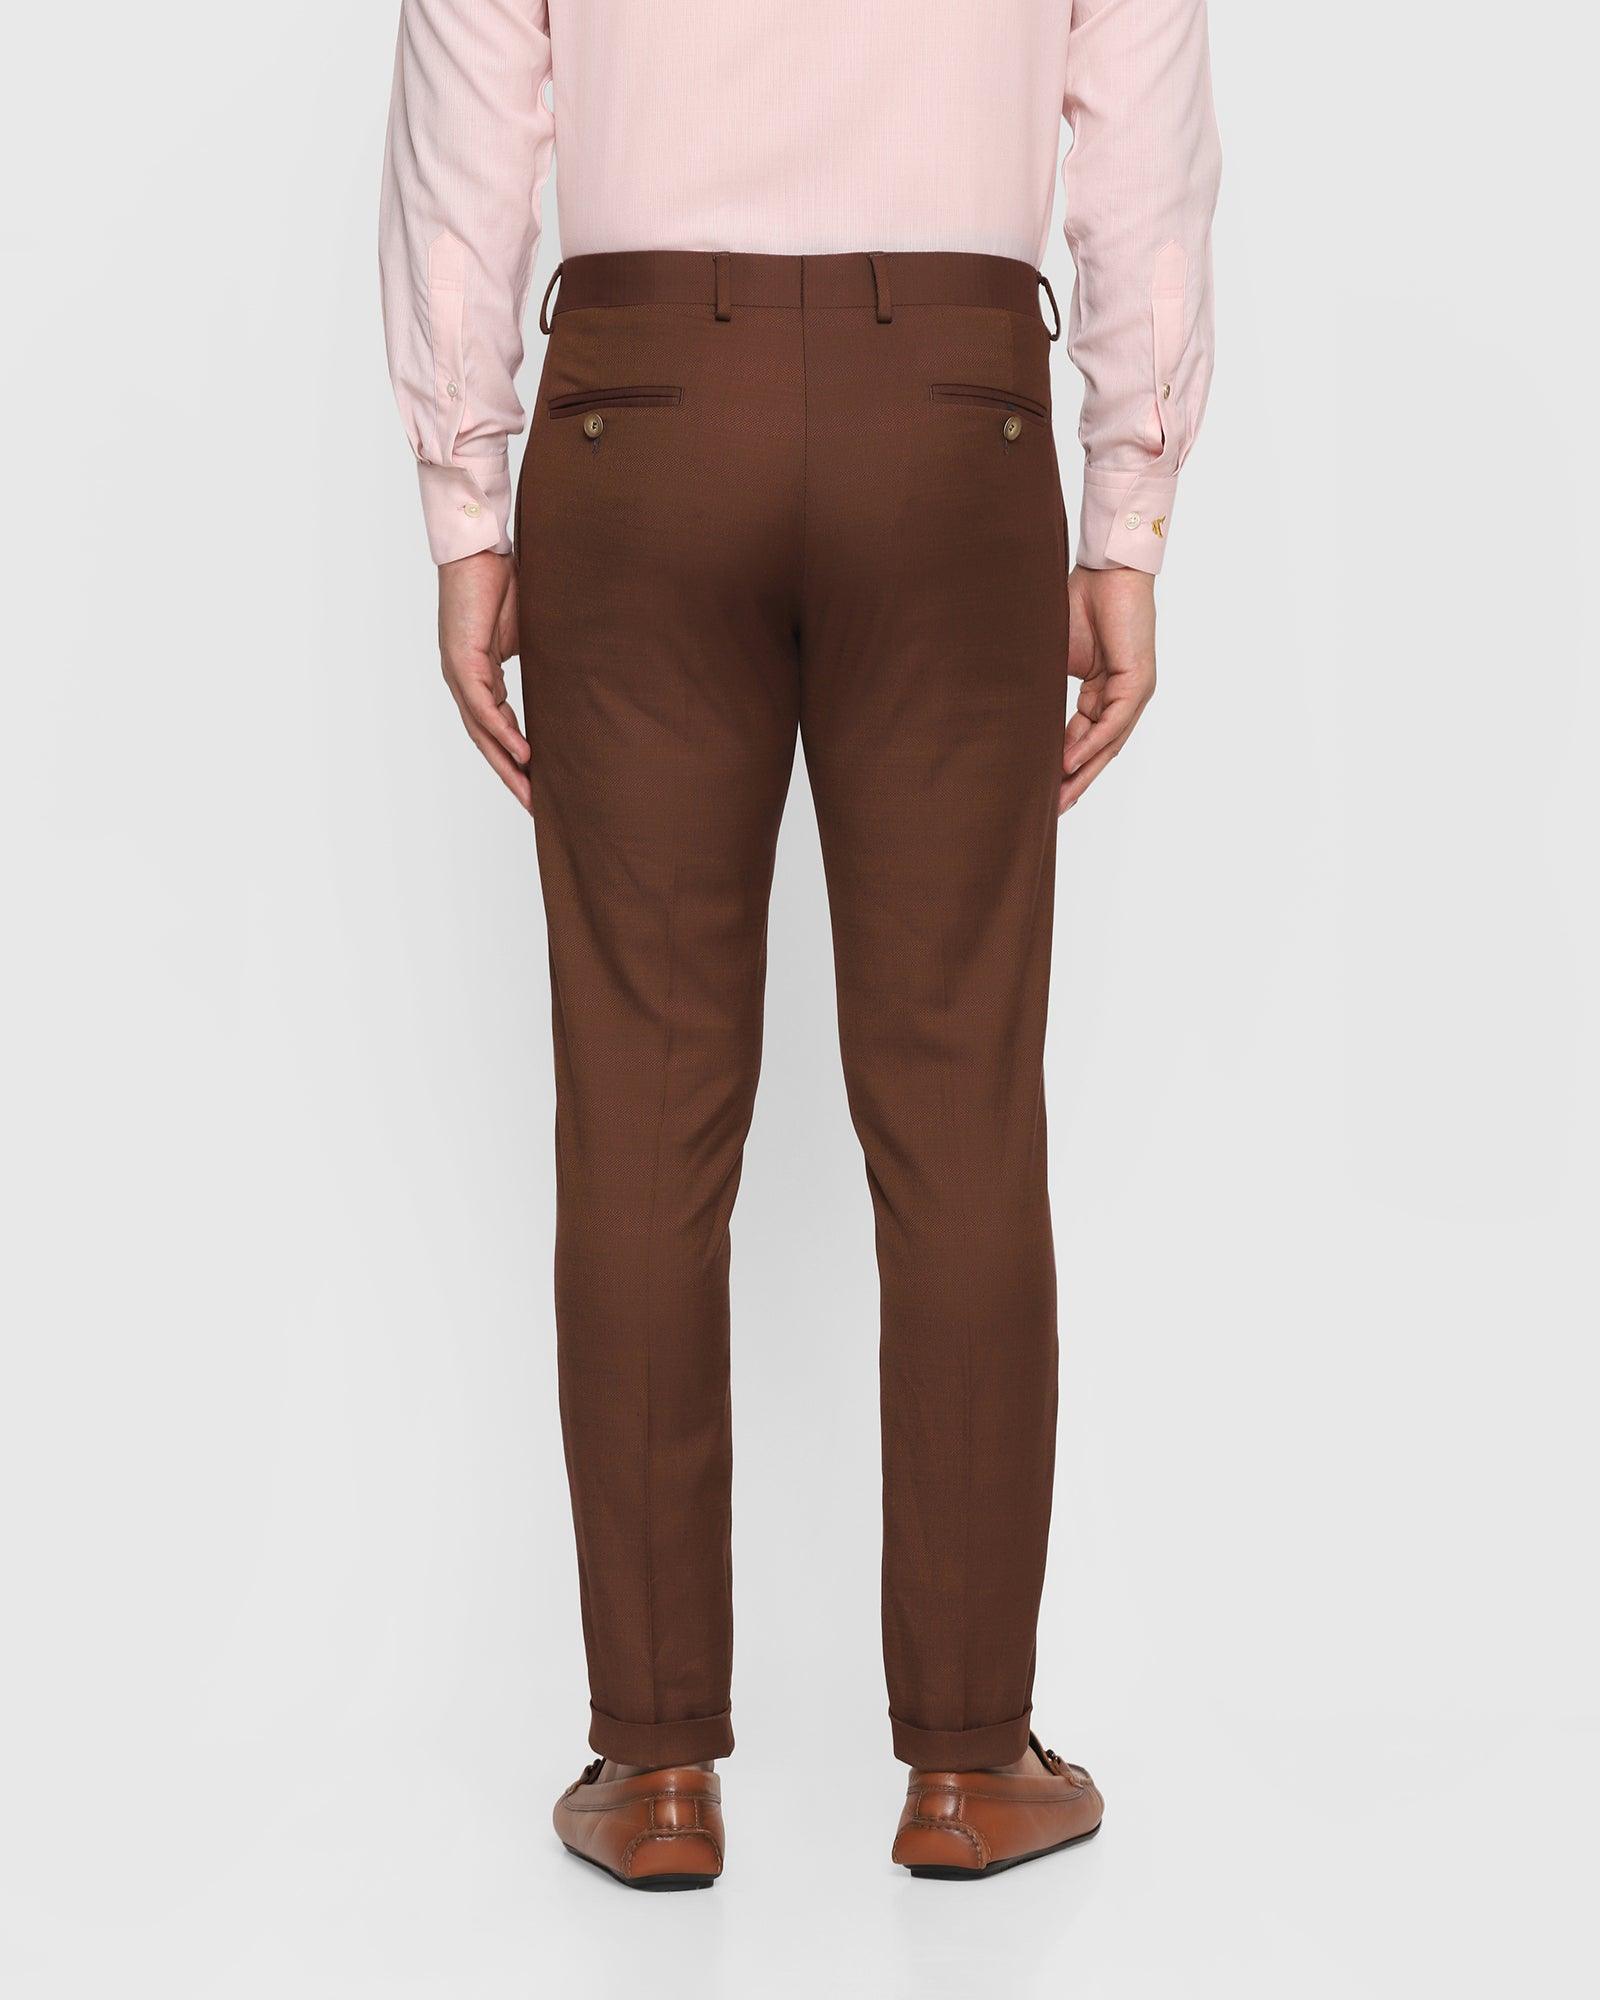 Buy BLACKBERRYS Natural Solid Cotton Slim Fit Mens Trousers | Shoppers Stop